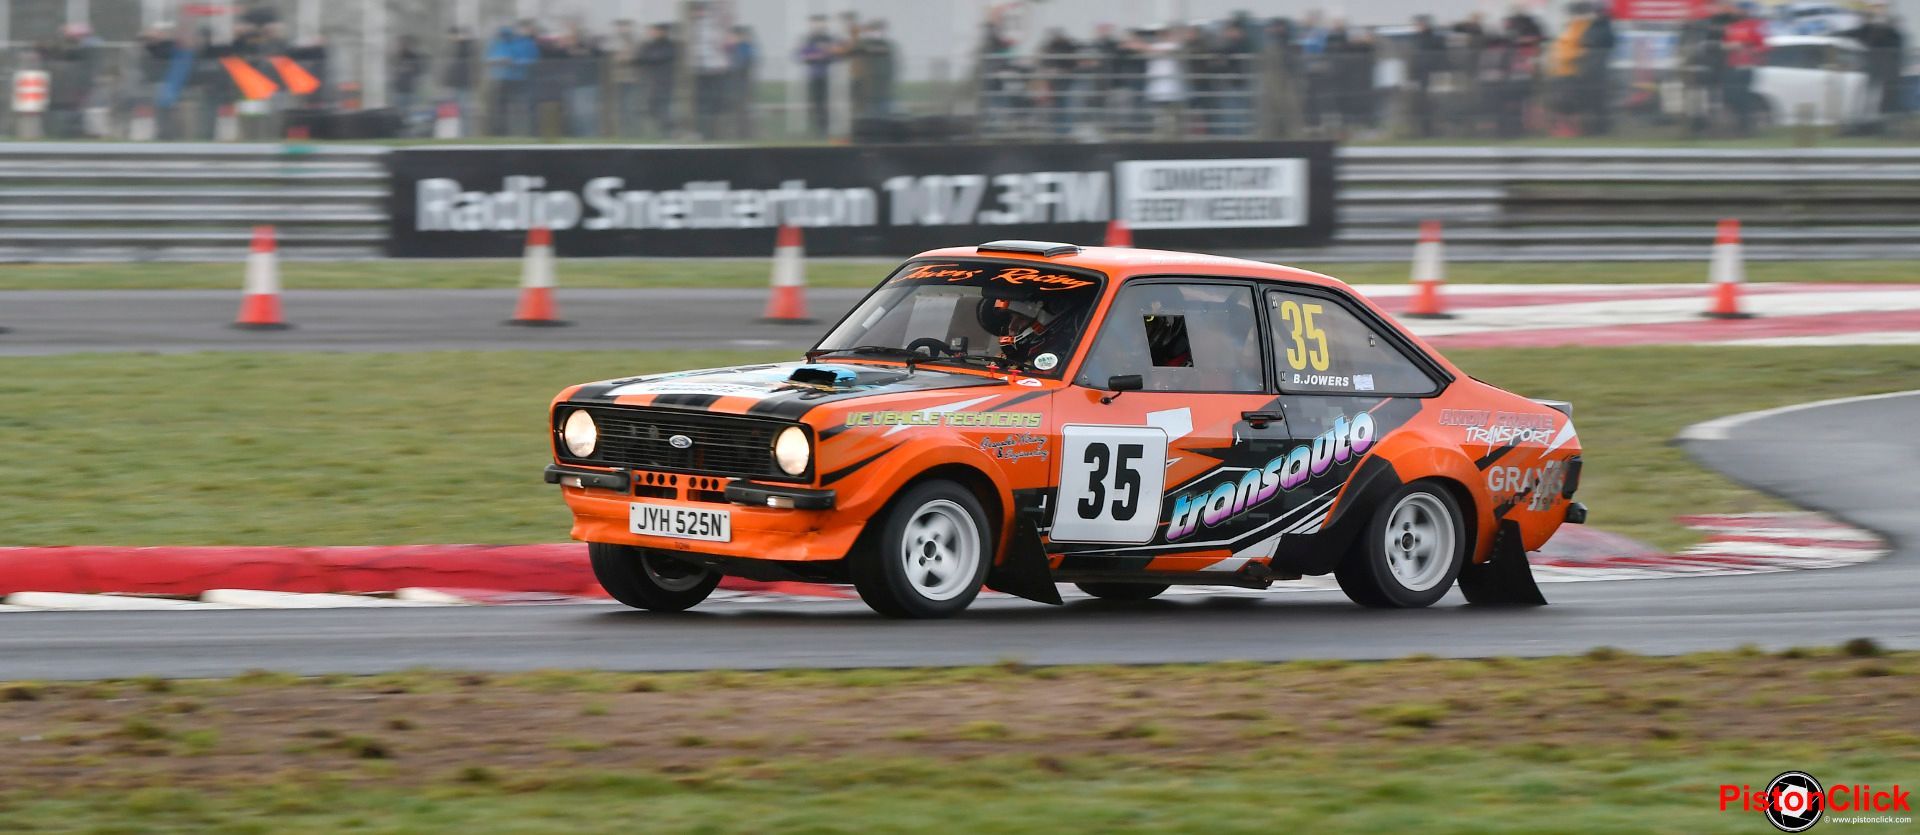 Ford Escort Mk2 at the Anglia Motor Sport Club Snetterton Stage Rally